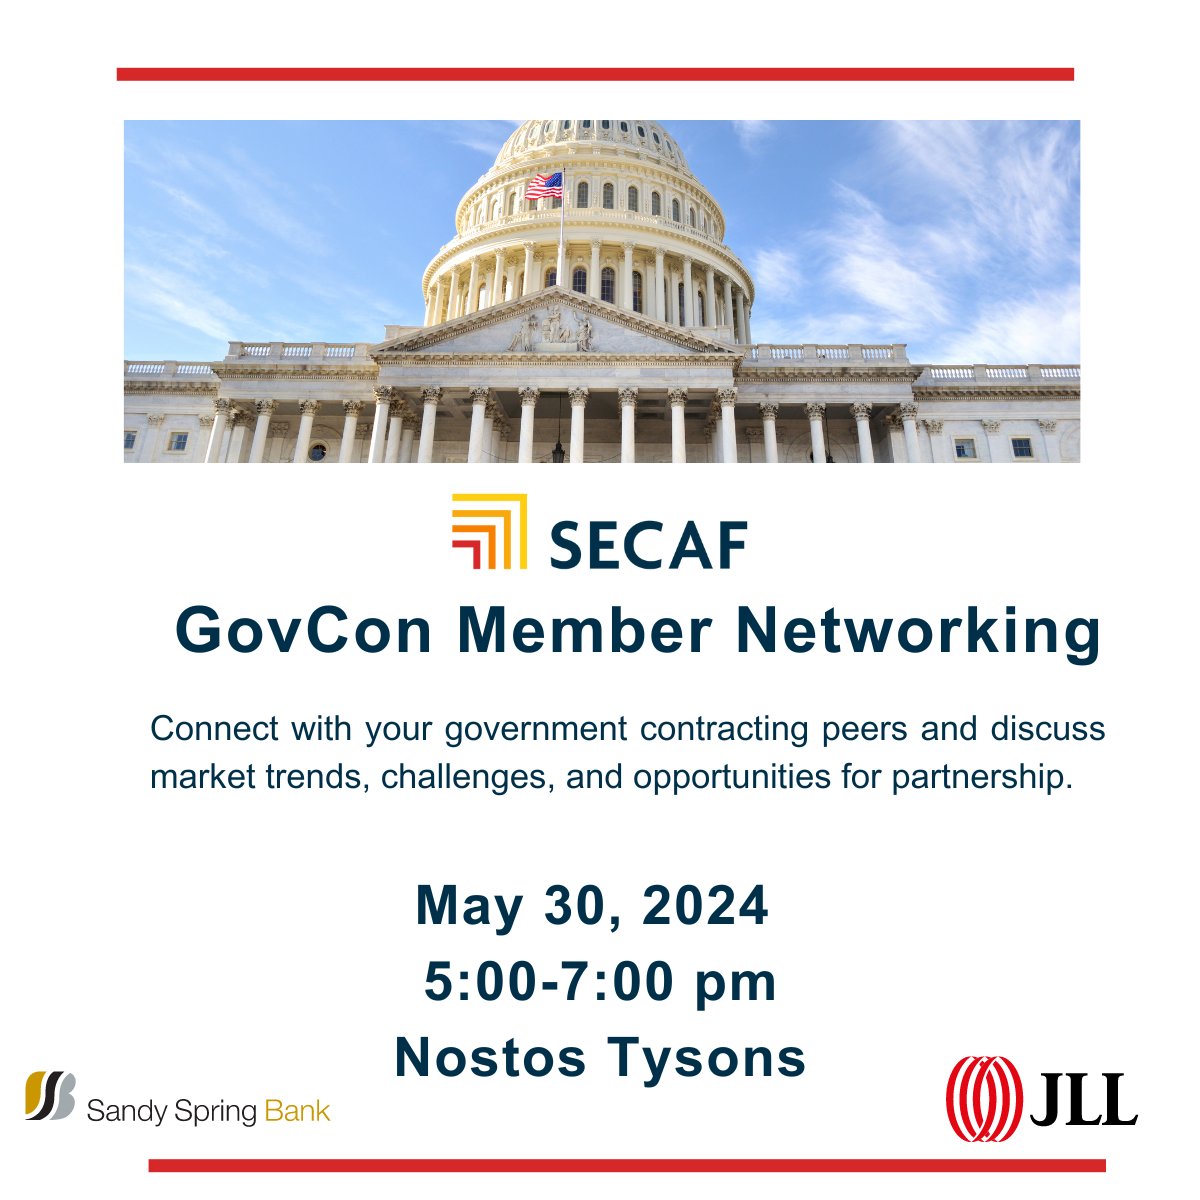 Next week! Don't miss our May GovCon Member Networking on May 30th. Join the conversation with peers, partners, and customers to find new ways to grow your business. ow.ly/7JLf50RNOJG